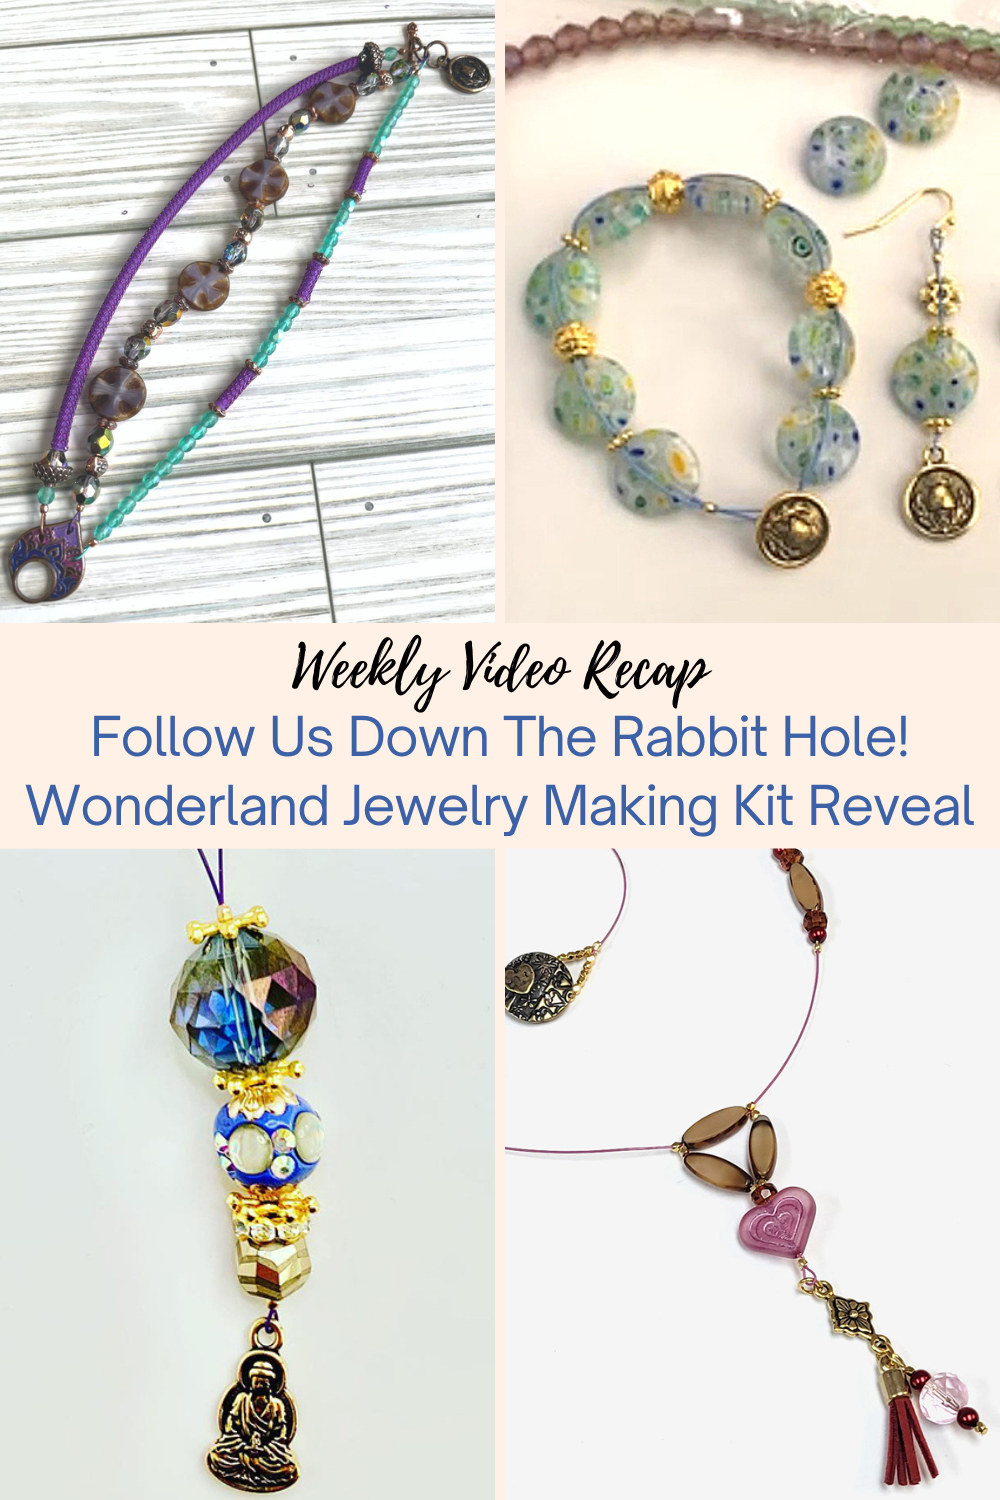 Follow Us Down The Rabbit Hole! Wonderland Jewelry Making Kit Reveal Collage